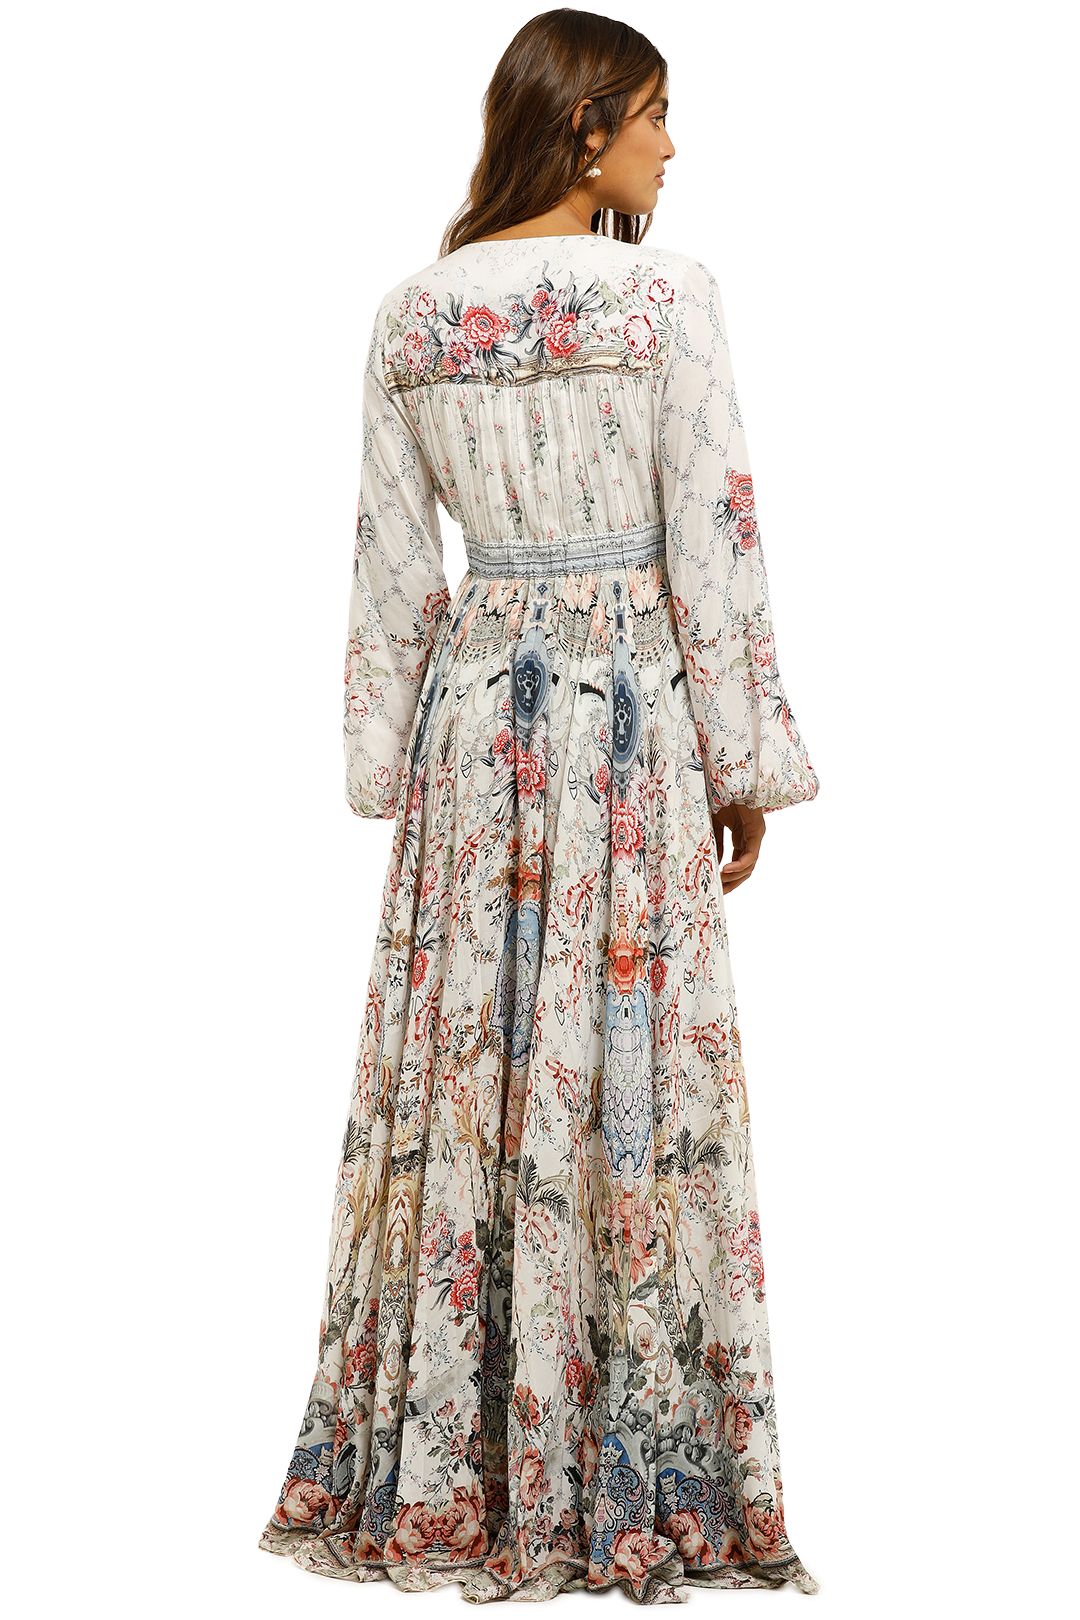 Camilla-Peasant-Dress-with-Tie-Front-Souther-Bell-Back